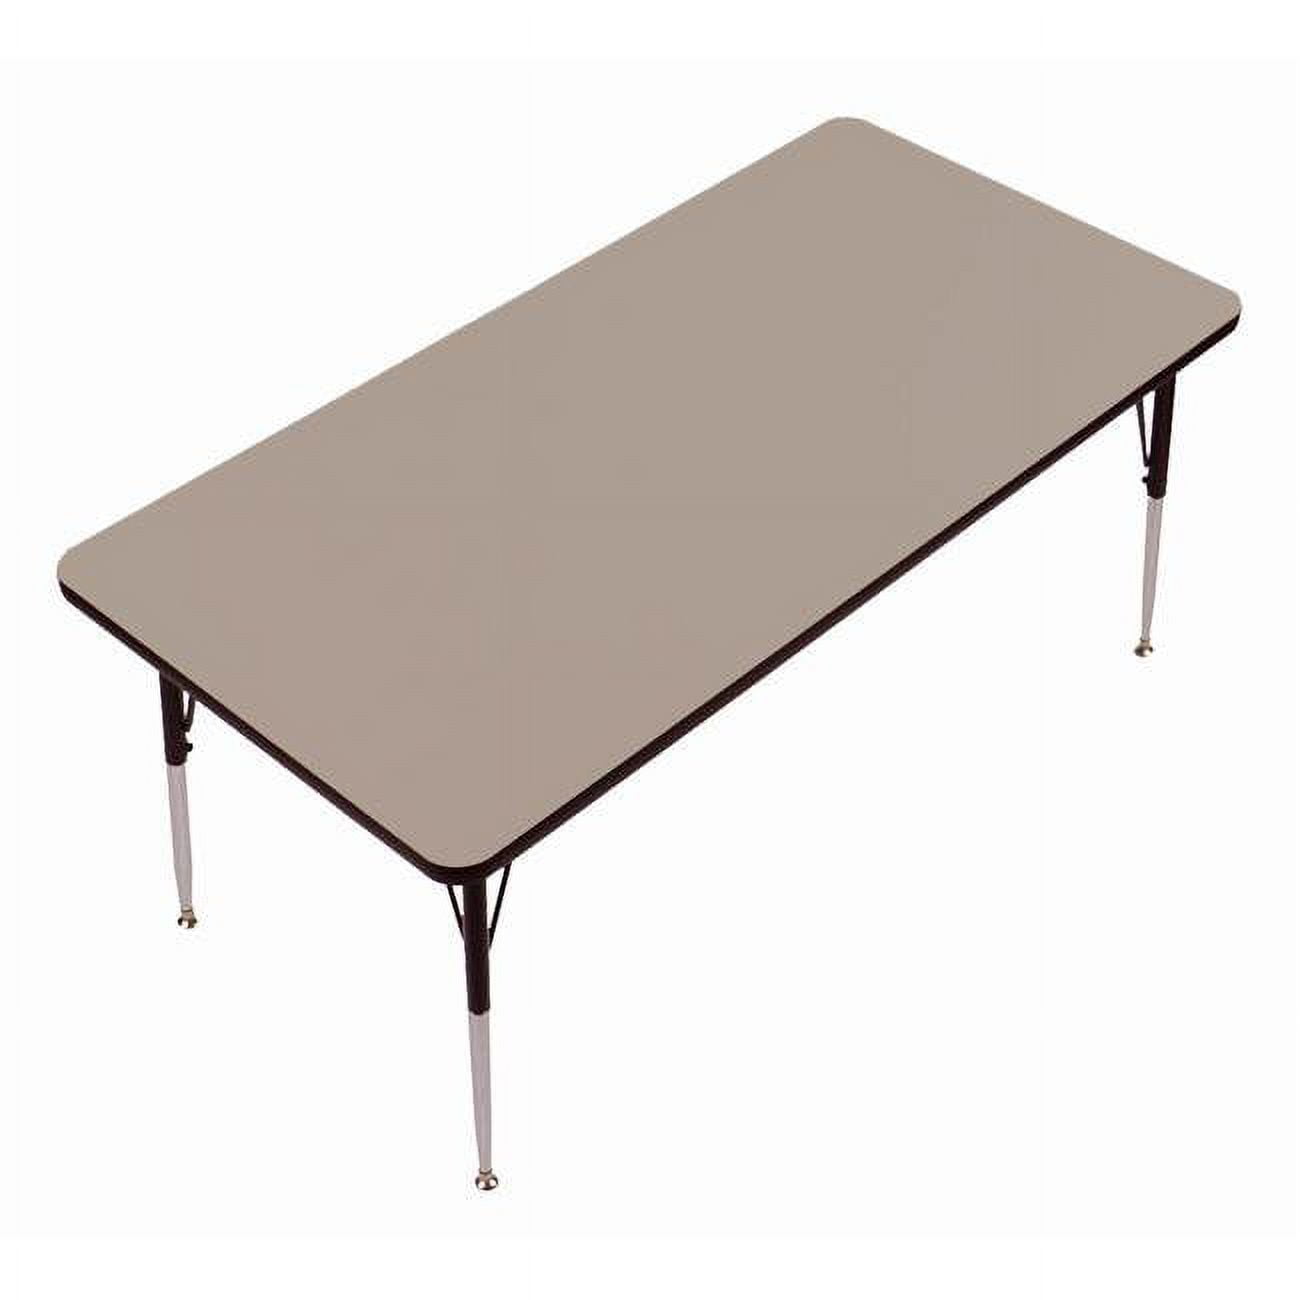 A36-rnds-54 1.25 In. High Pressure Top Round Activity Tables, Savannah Sand - 36 In.